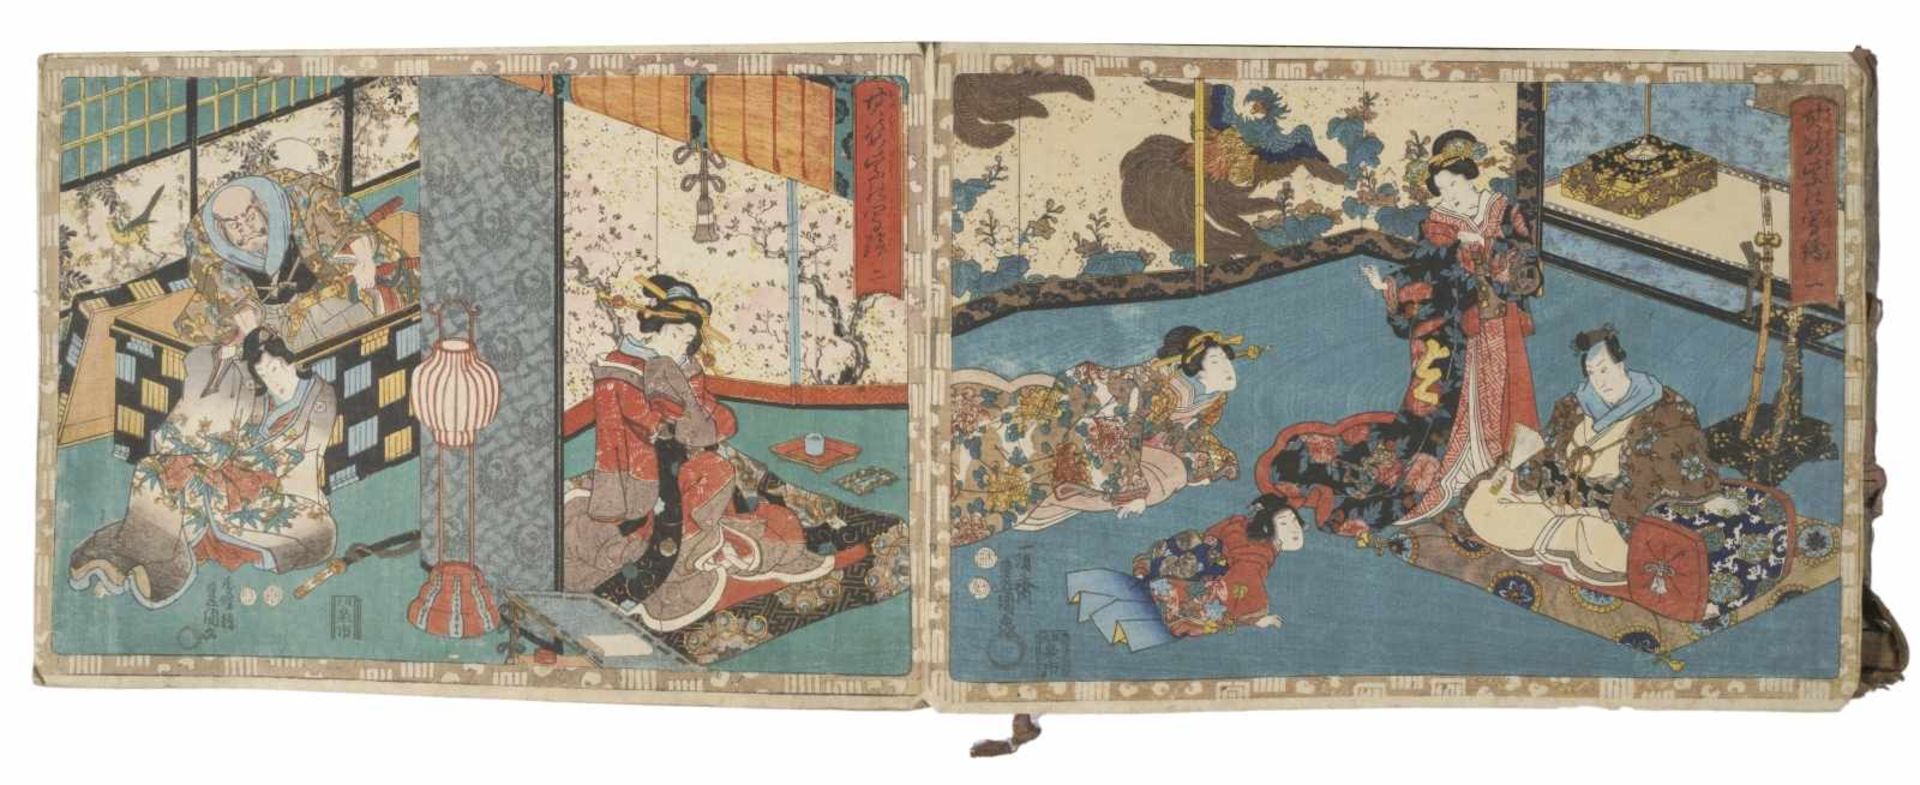 Leporello with many colored woodcuts, Japan, 19th c., 25 x 2,5 x 35 cm, Provenance: